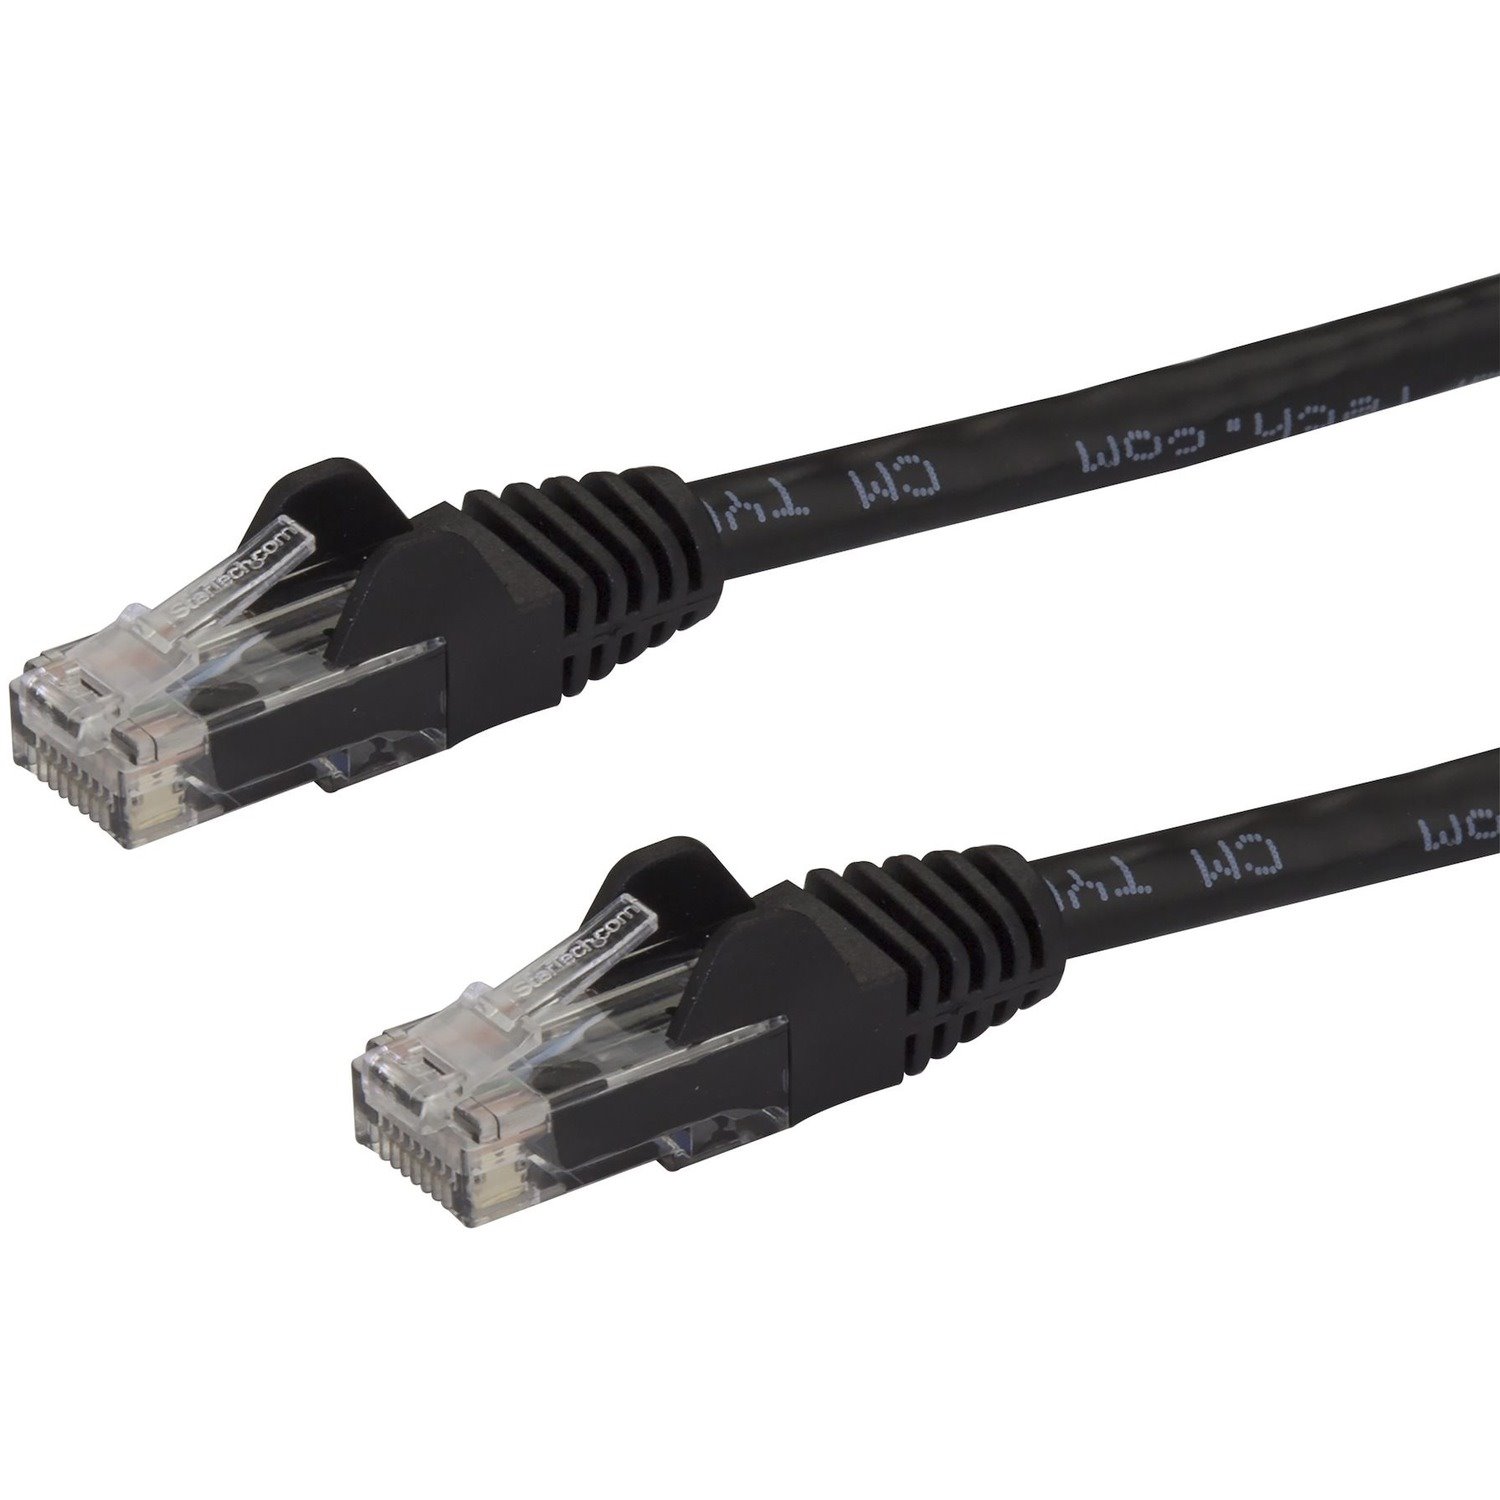 StarTech.com 15m CAT6 Ethernet Cable - Black Snagless Gigabit - 100W PoE UTP 650MHz Category 6 Patch Cord UL Certified Wiring/TIA